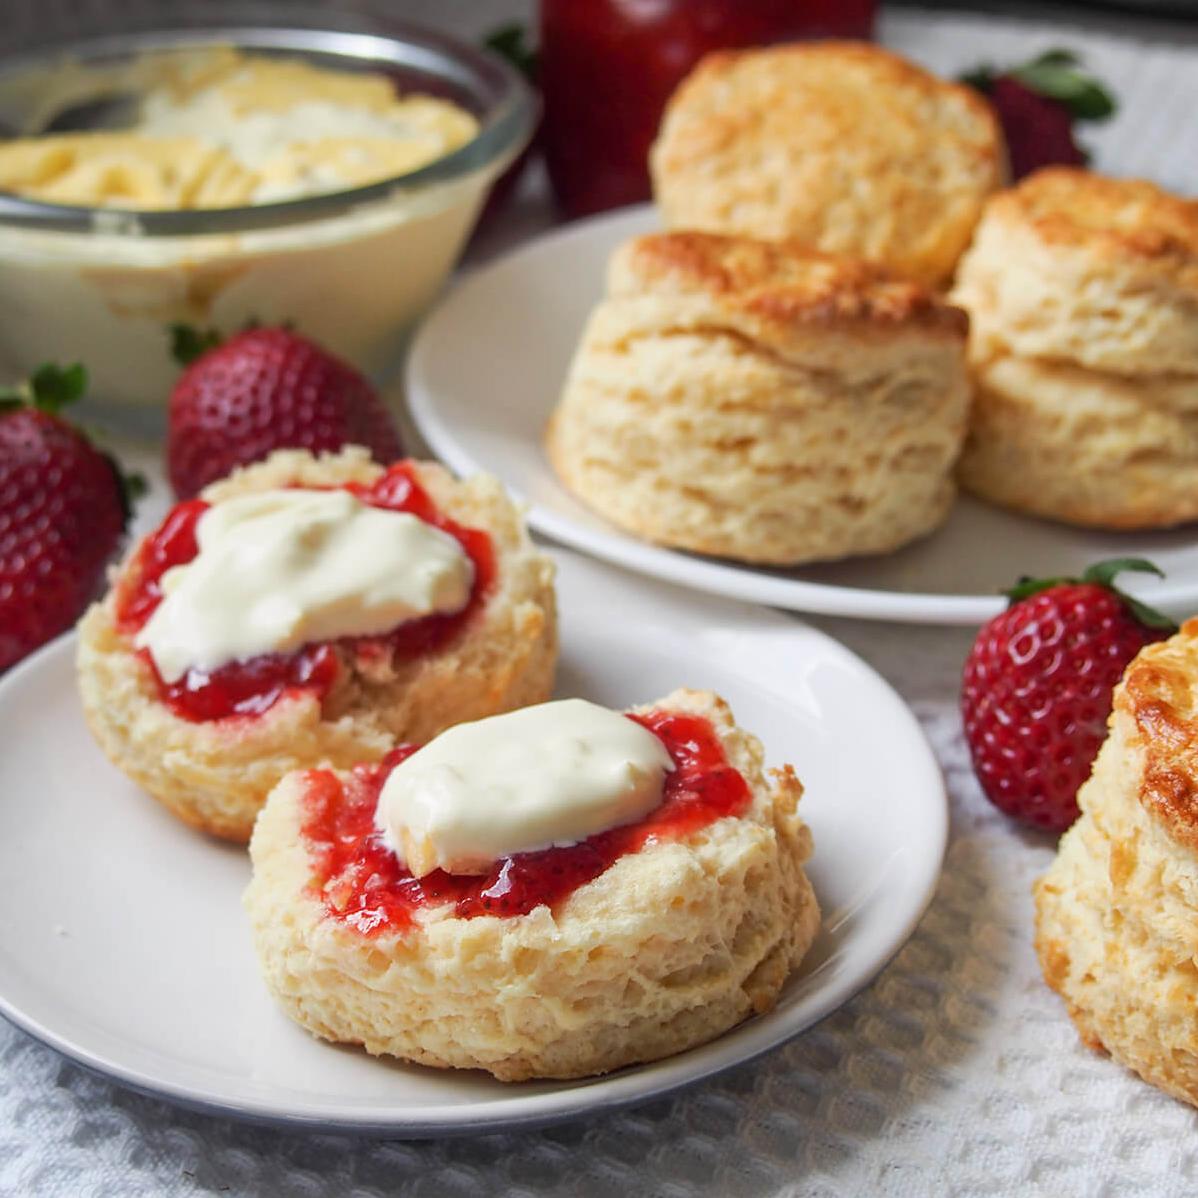  Golden-brown and buttery scones make the perfect snack with a cup of tea.